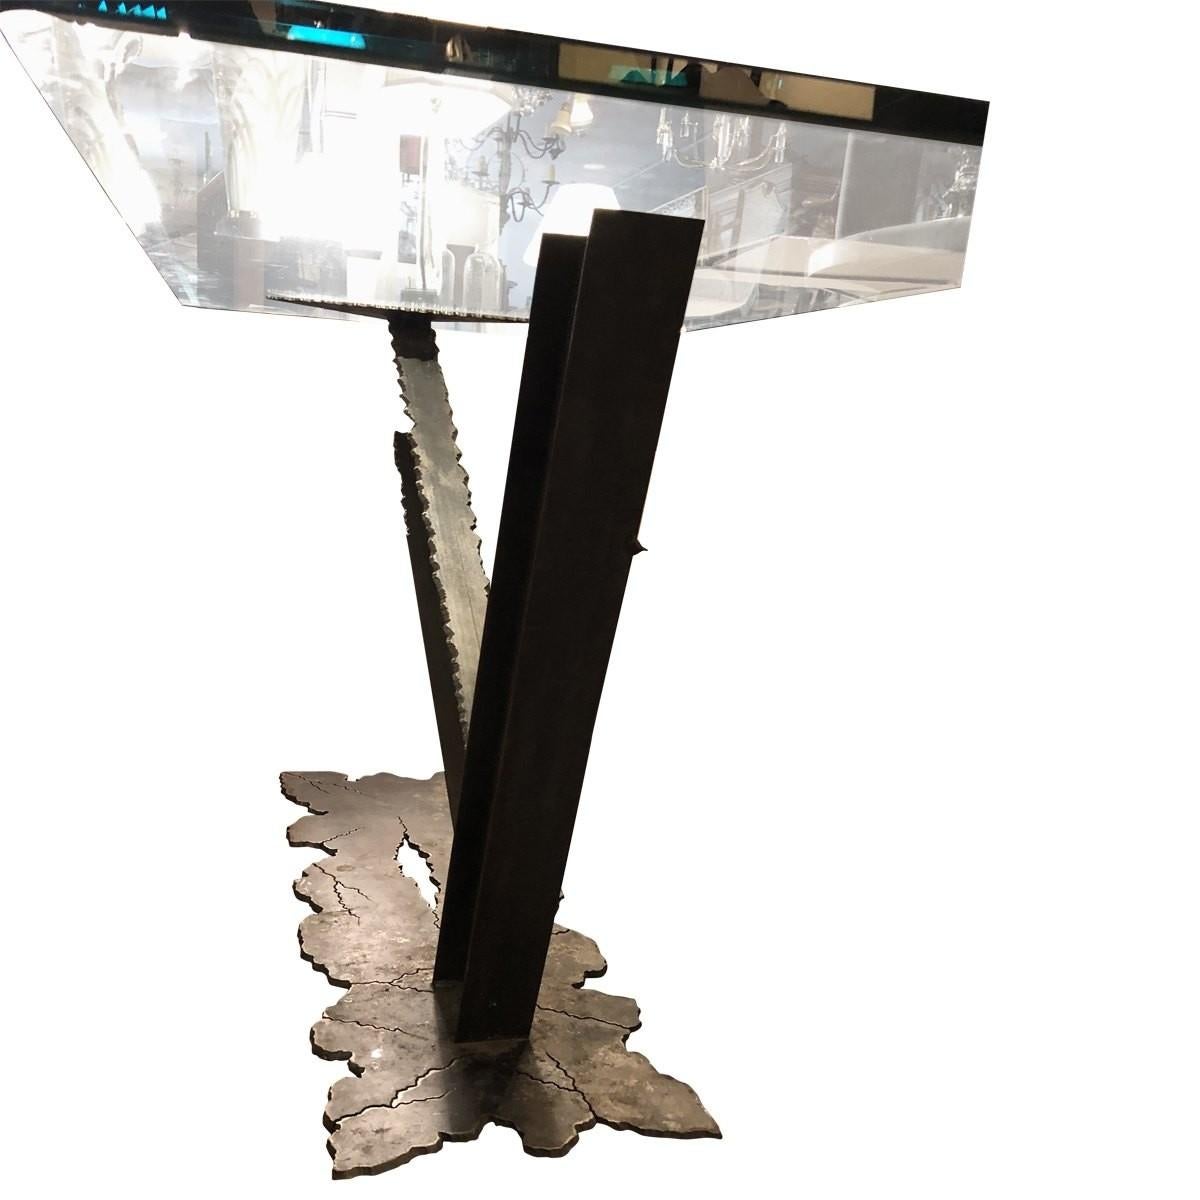 Contemporary Modern Sculptural Studio Console Table, 21st Century In Excellent Condition For Sale In Pasadena, CA